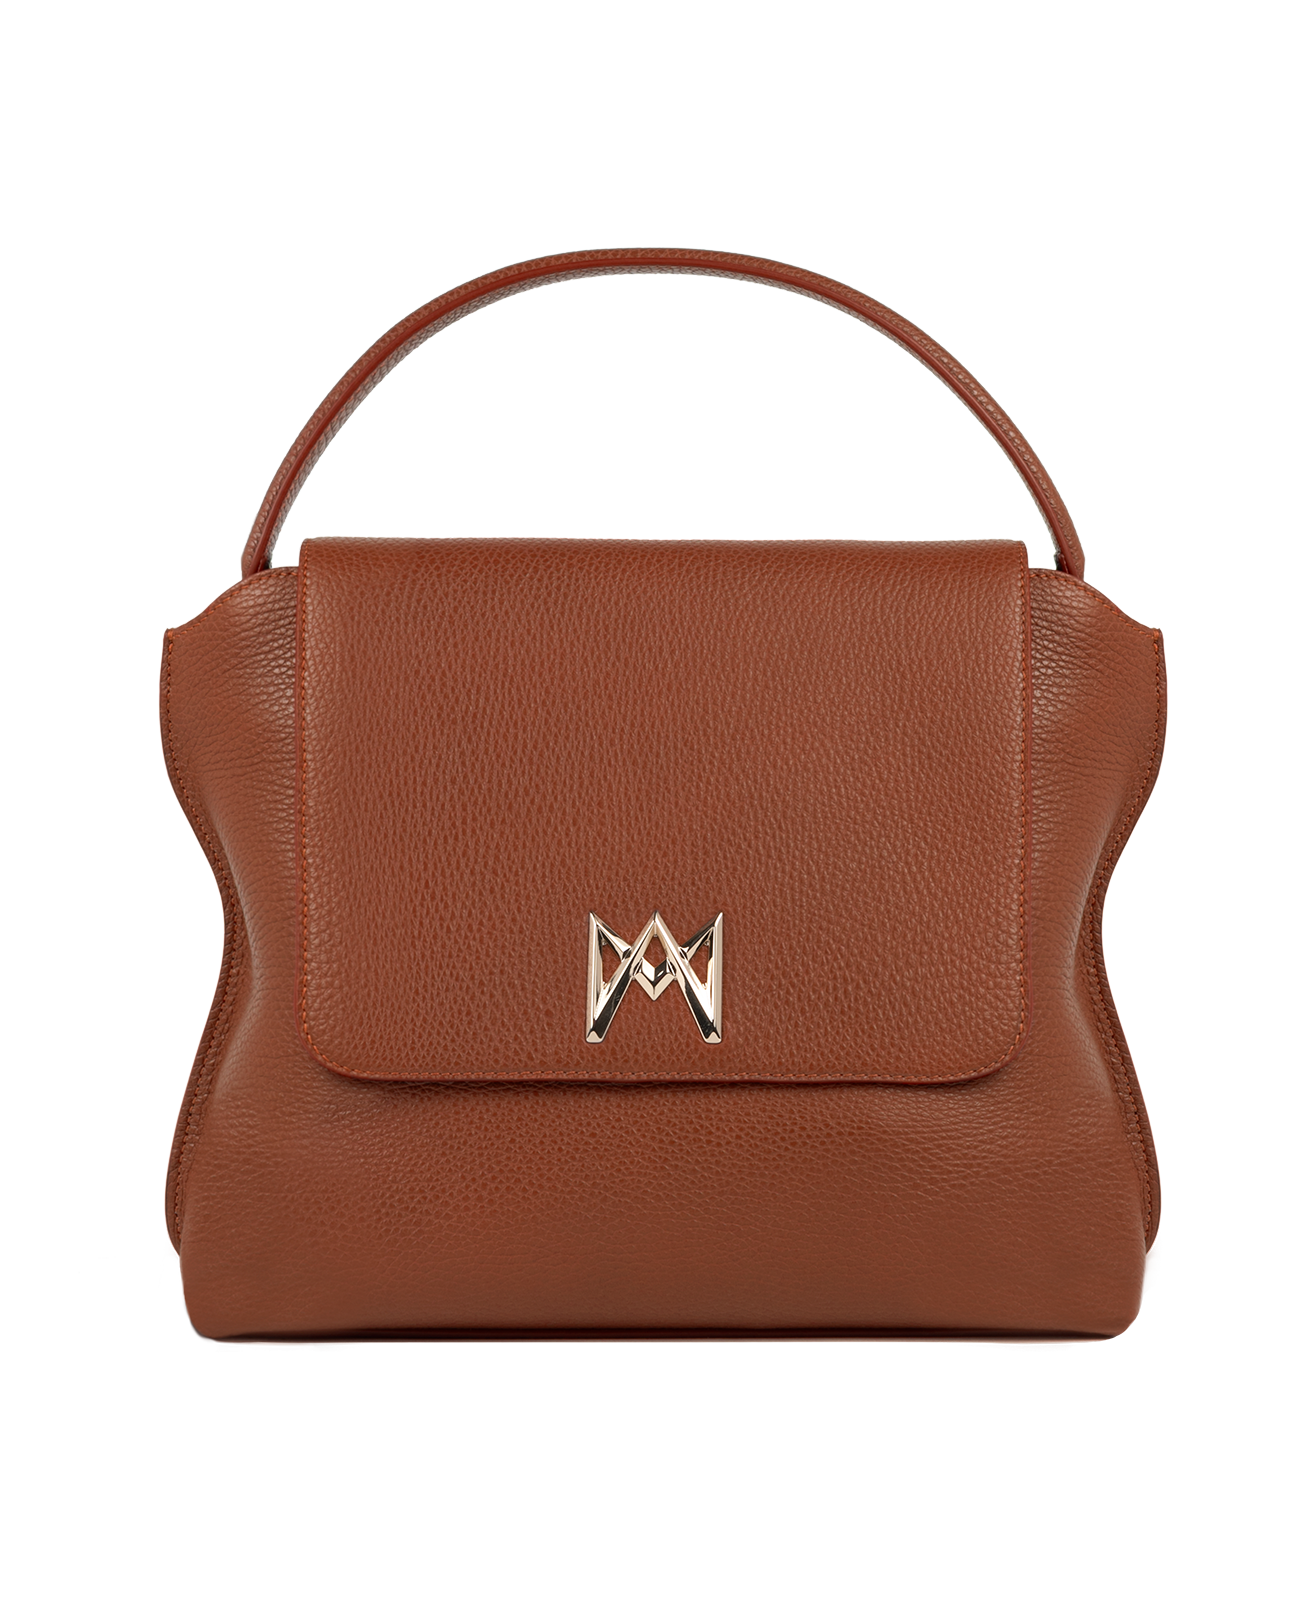 Cross-body bag in Italian full-grain leather, semi-aniline calf Italian leather with detachable shoulder strap.Three compartments, zip pocket in the back compartment. Magnetic flap closure with logo. Color: Brown. Size:Large